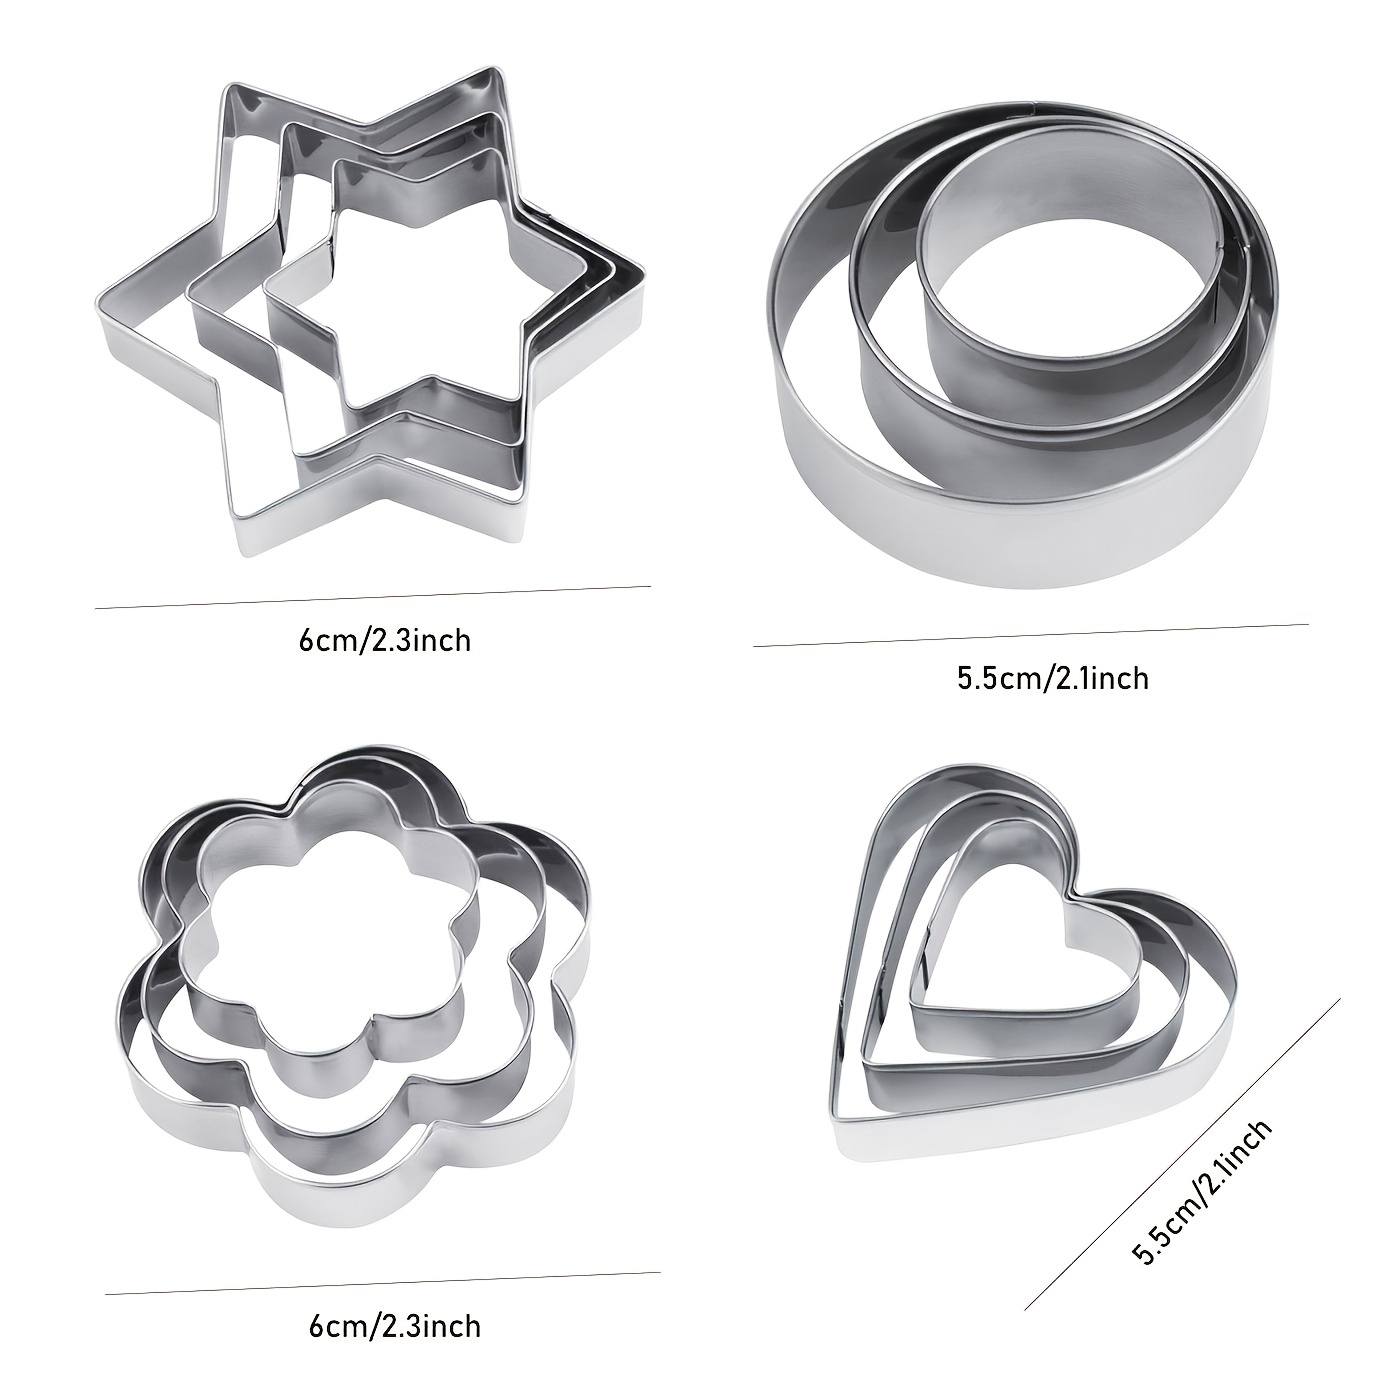 Metal Cookie Cutters Set - Star Cookie Cutter Stainless Steel Round Biscuit  Cutter Heart Small Star Cookie Cutters Mini Flower Molds Cutter for Baking